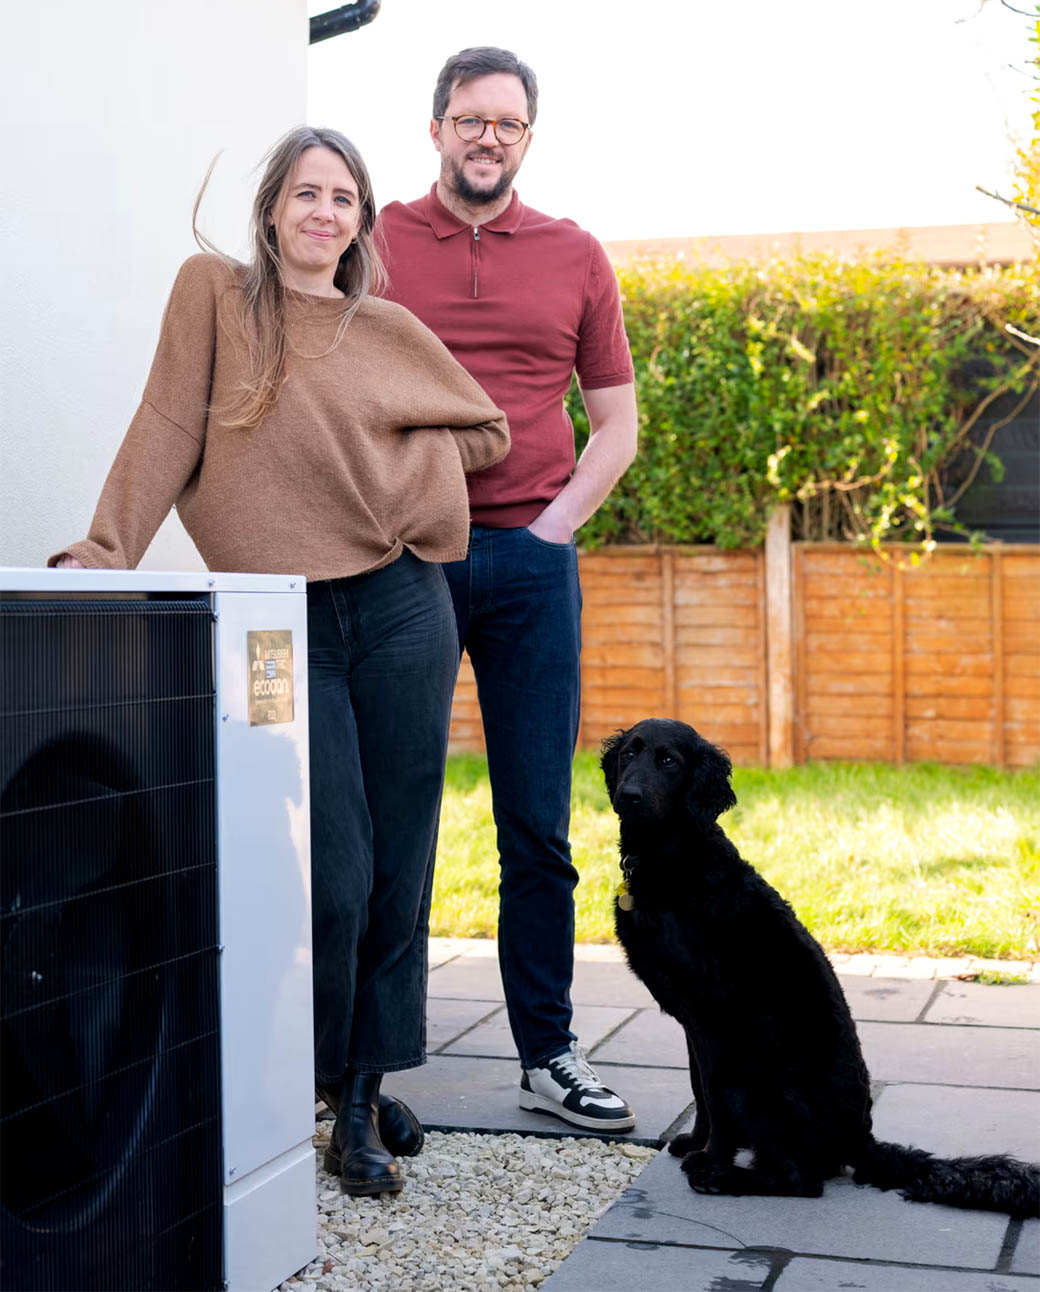 Our bills are lower and the dog’s a big fan’: Meet the couple who ditched a gas boiler for a heat pump